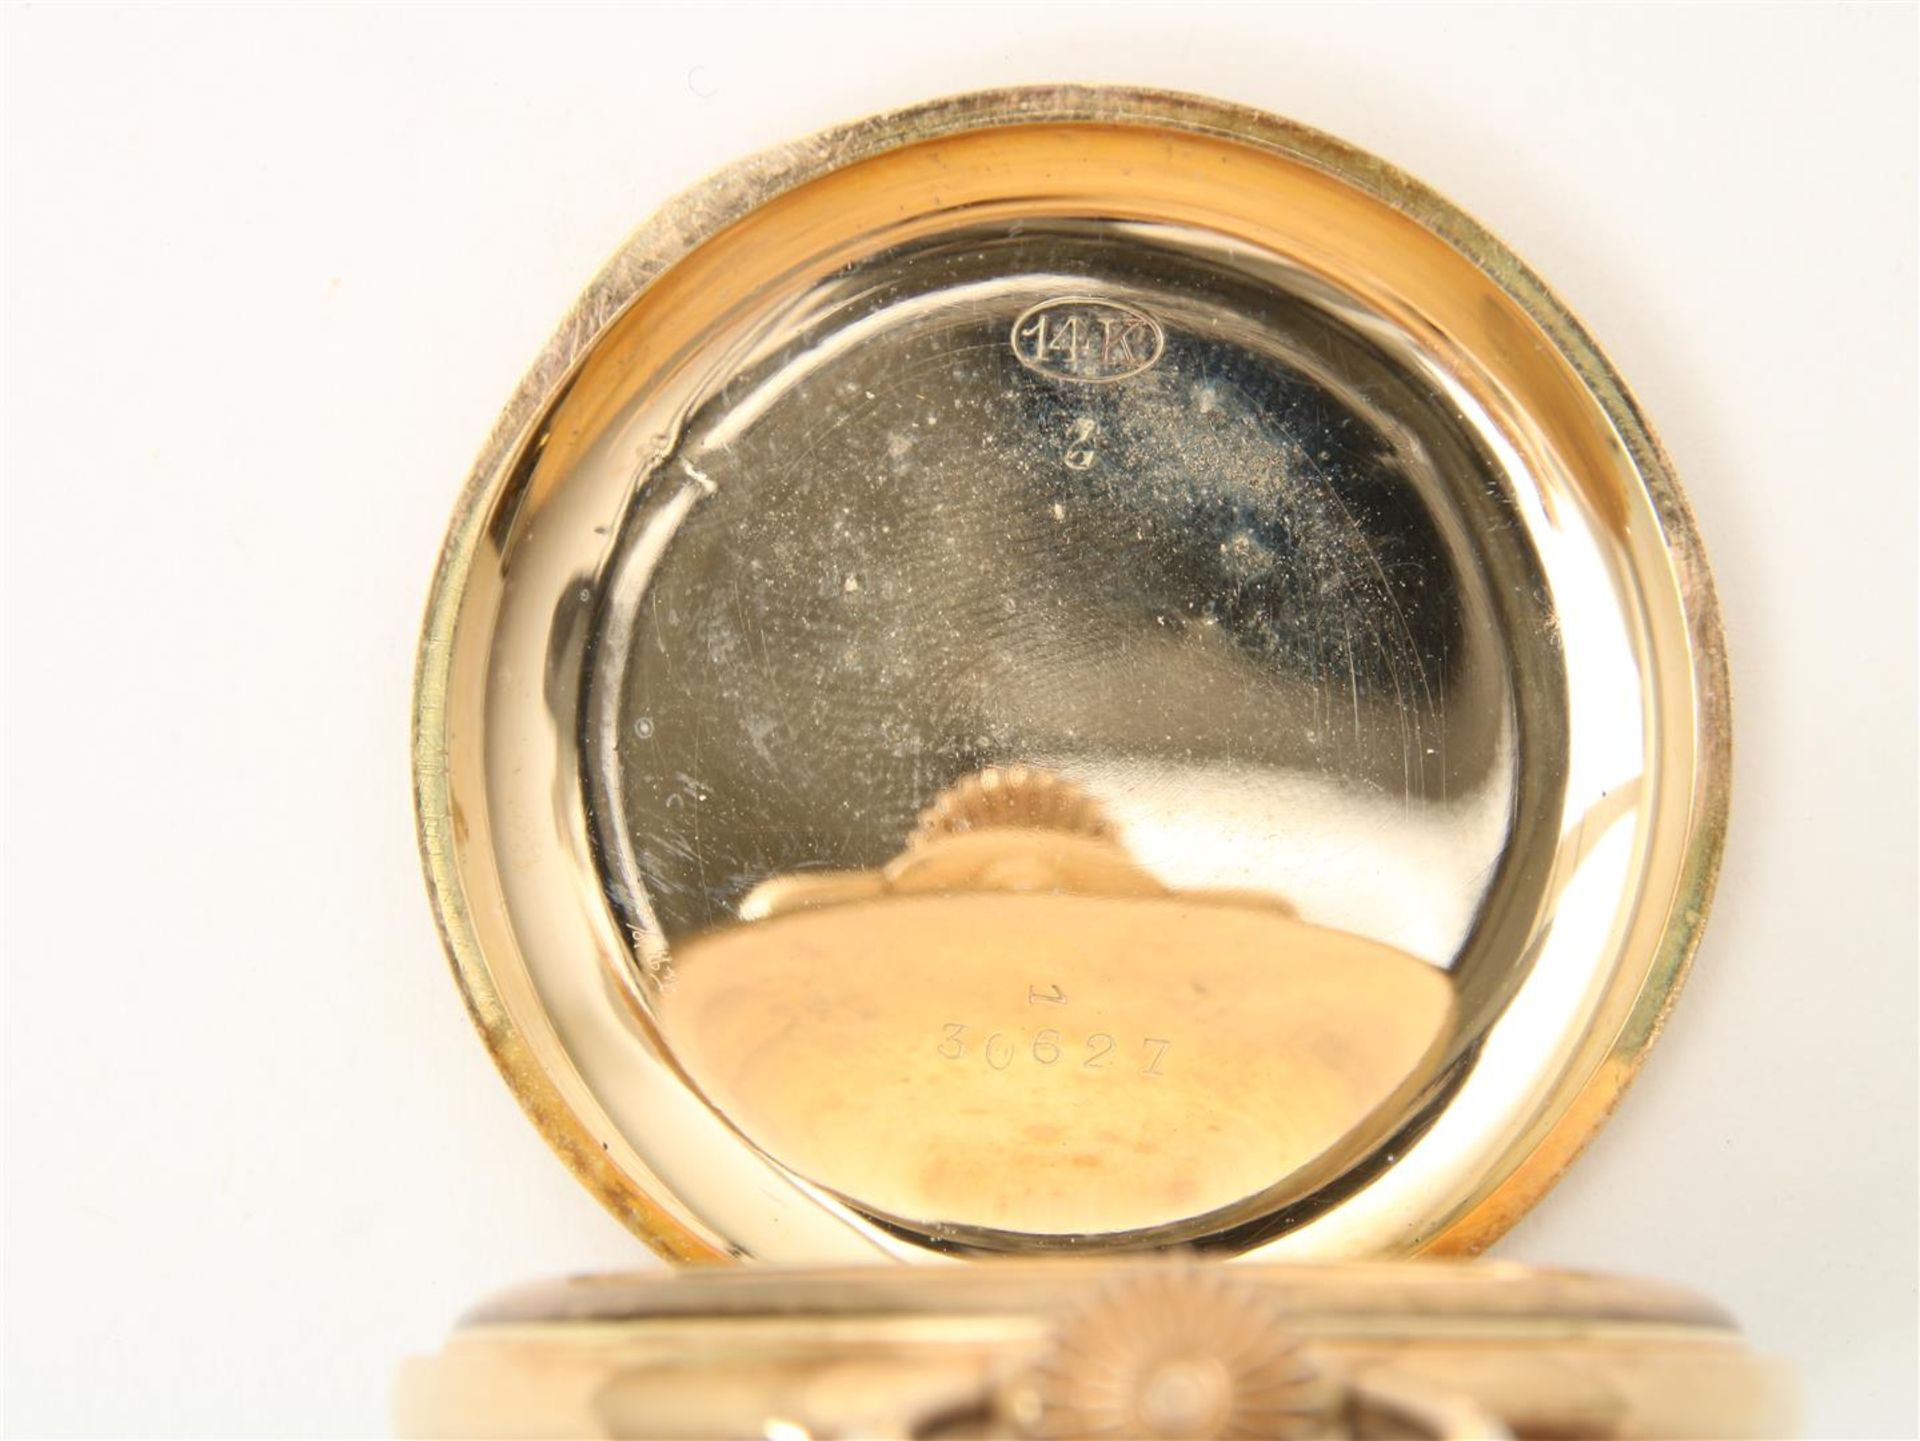 Pocket watch, yellow gold case, address: WALTHAM, grade 585/000, numbered: 30627, diameter 46 mm. - Image 2 of 2